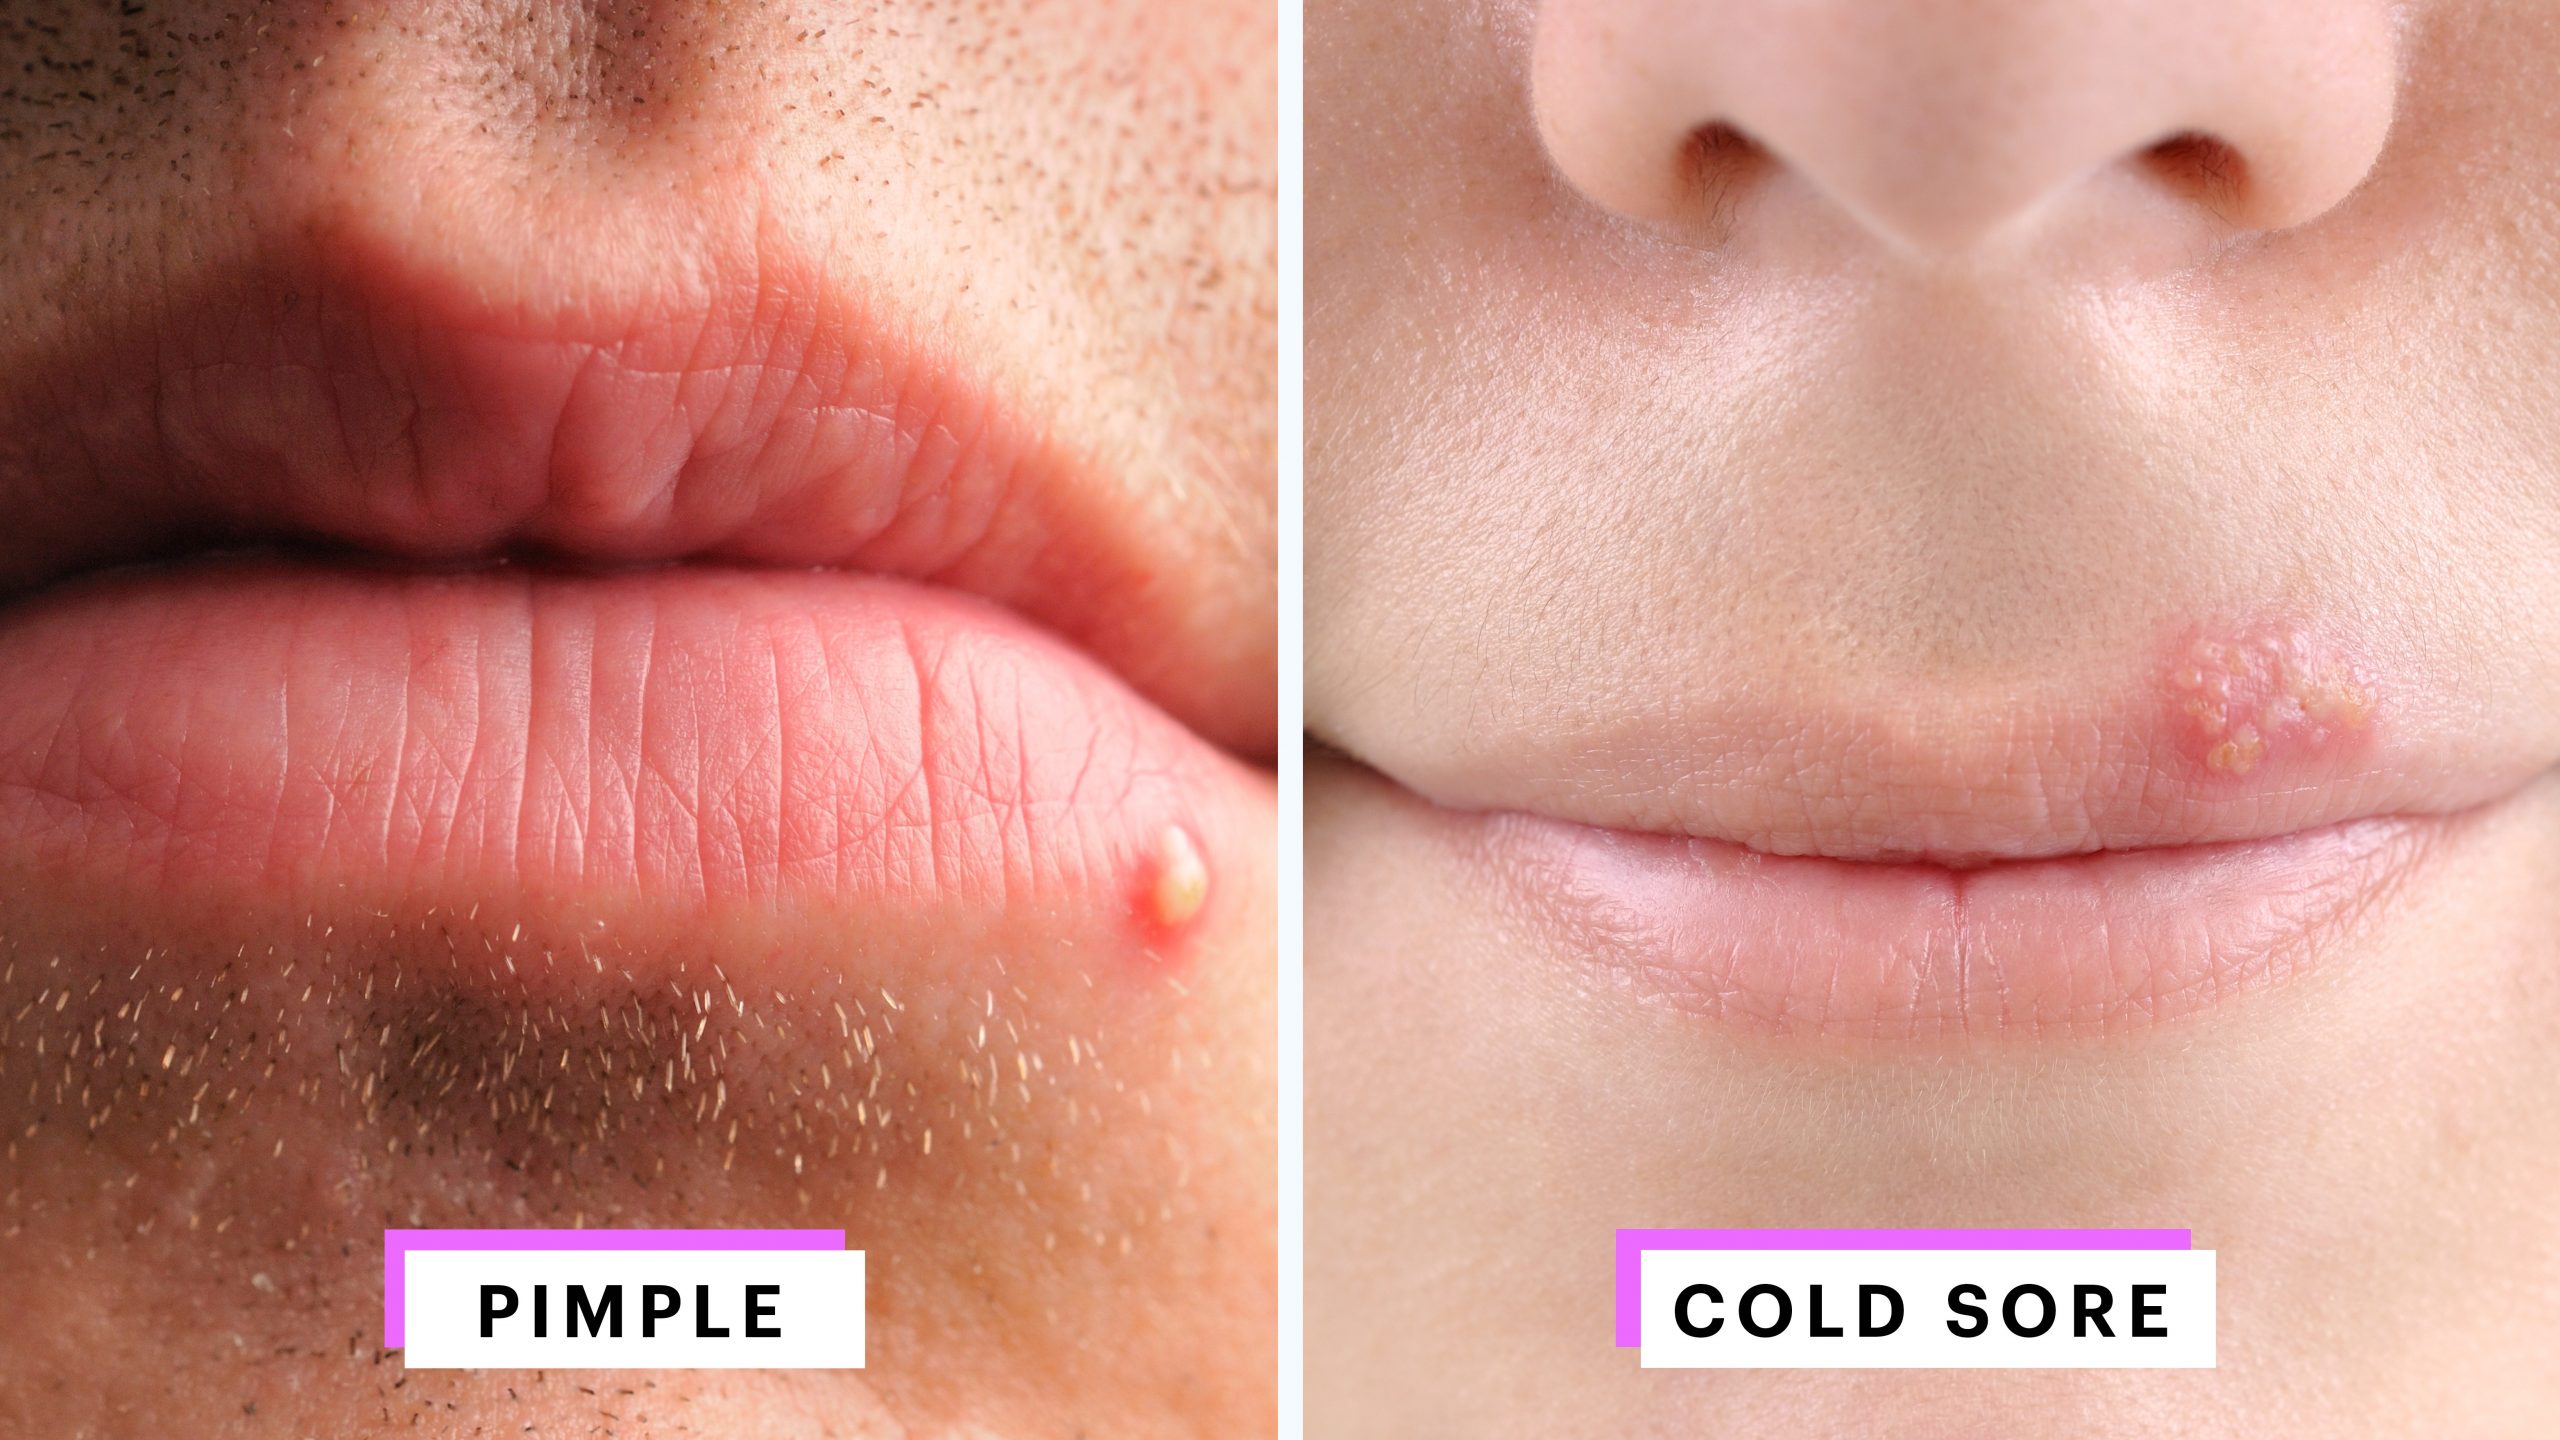 How to Identify a Herpes Cold Sore vs. Pimple